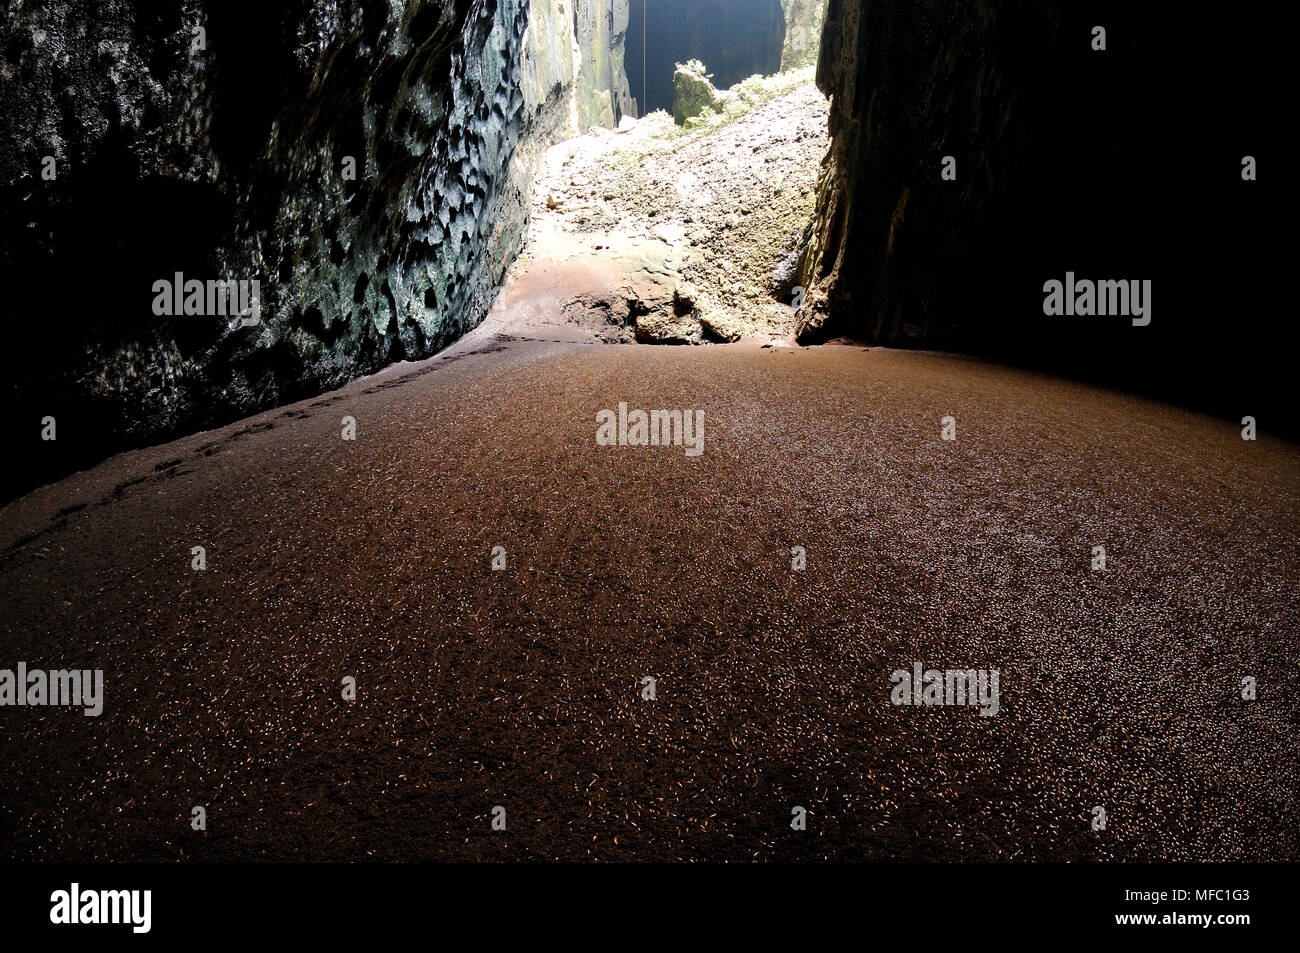 GOMANTONG CAVE with guano and thousands of cockroaches on floor Sabah, Borneo, Malaysia. Stock Photo